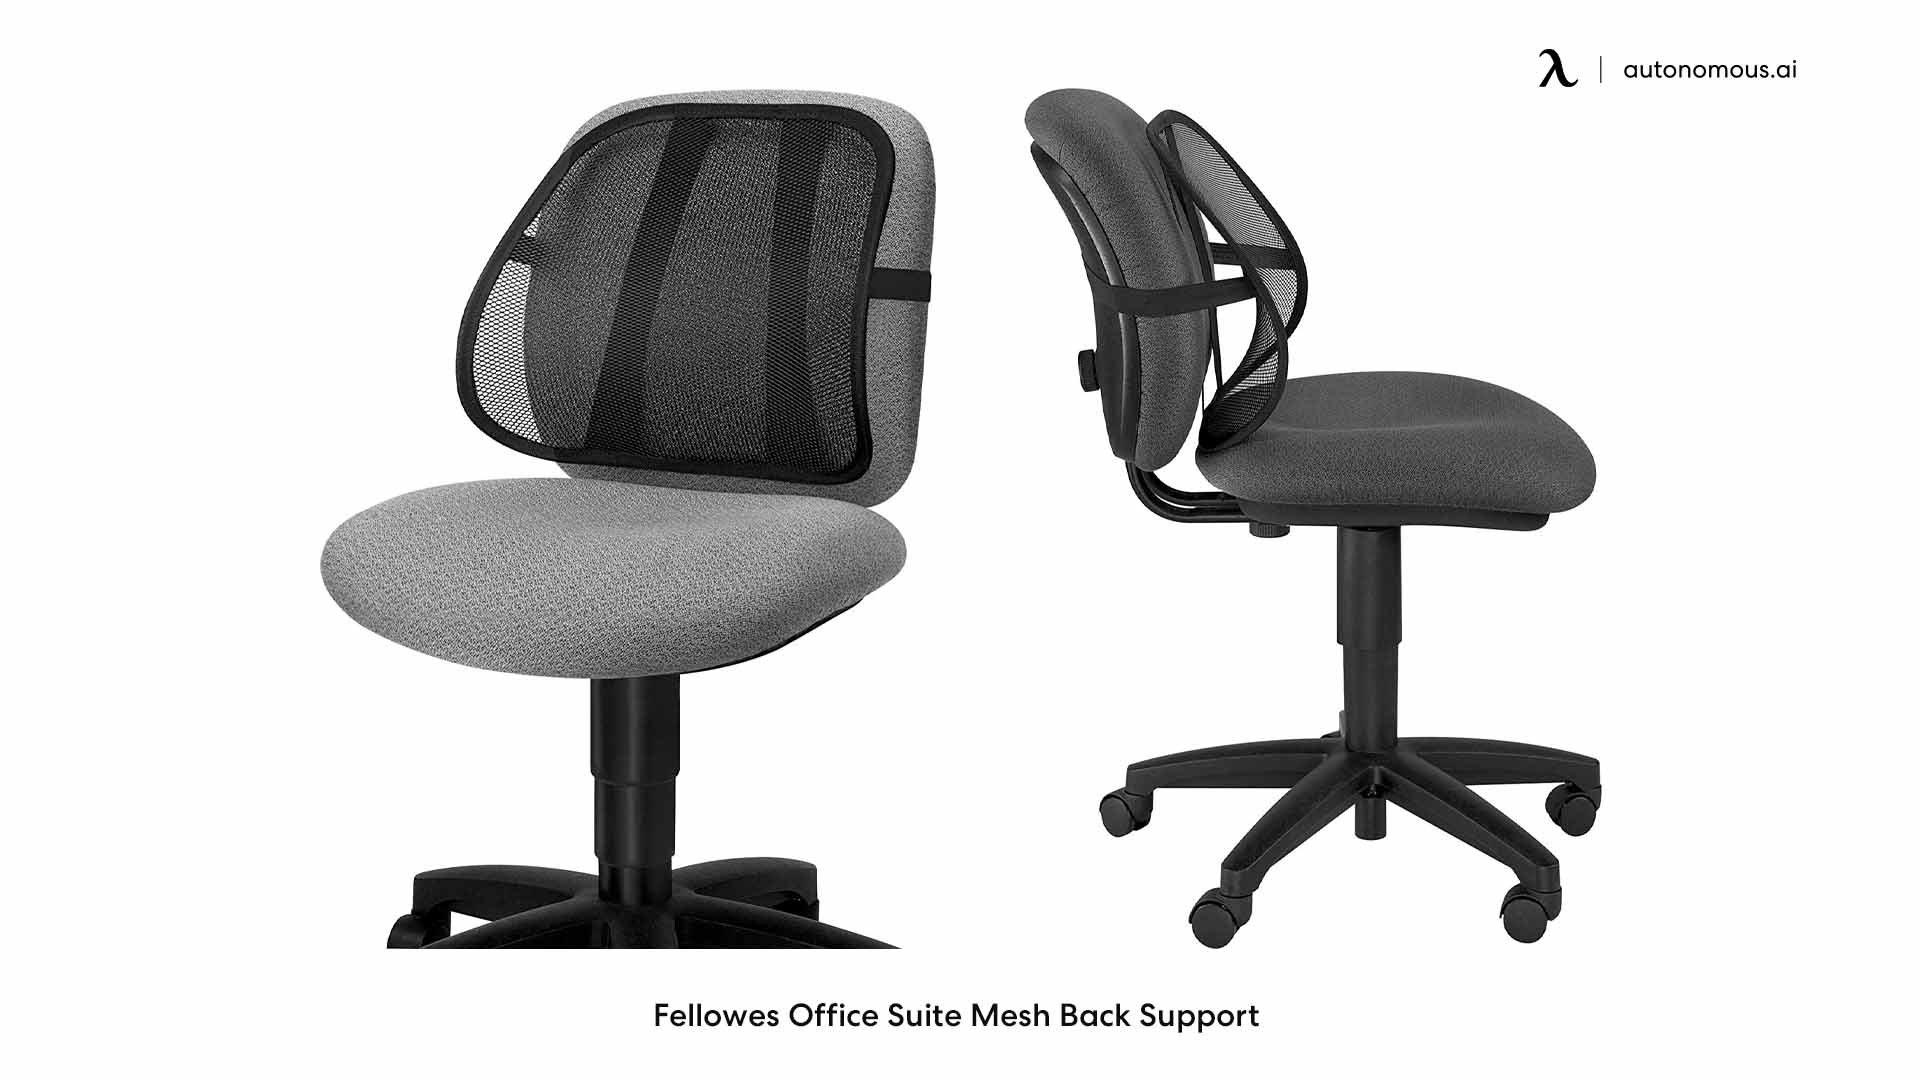 Fellowes Office Suite Mesh Back Support